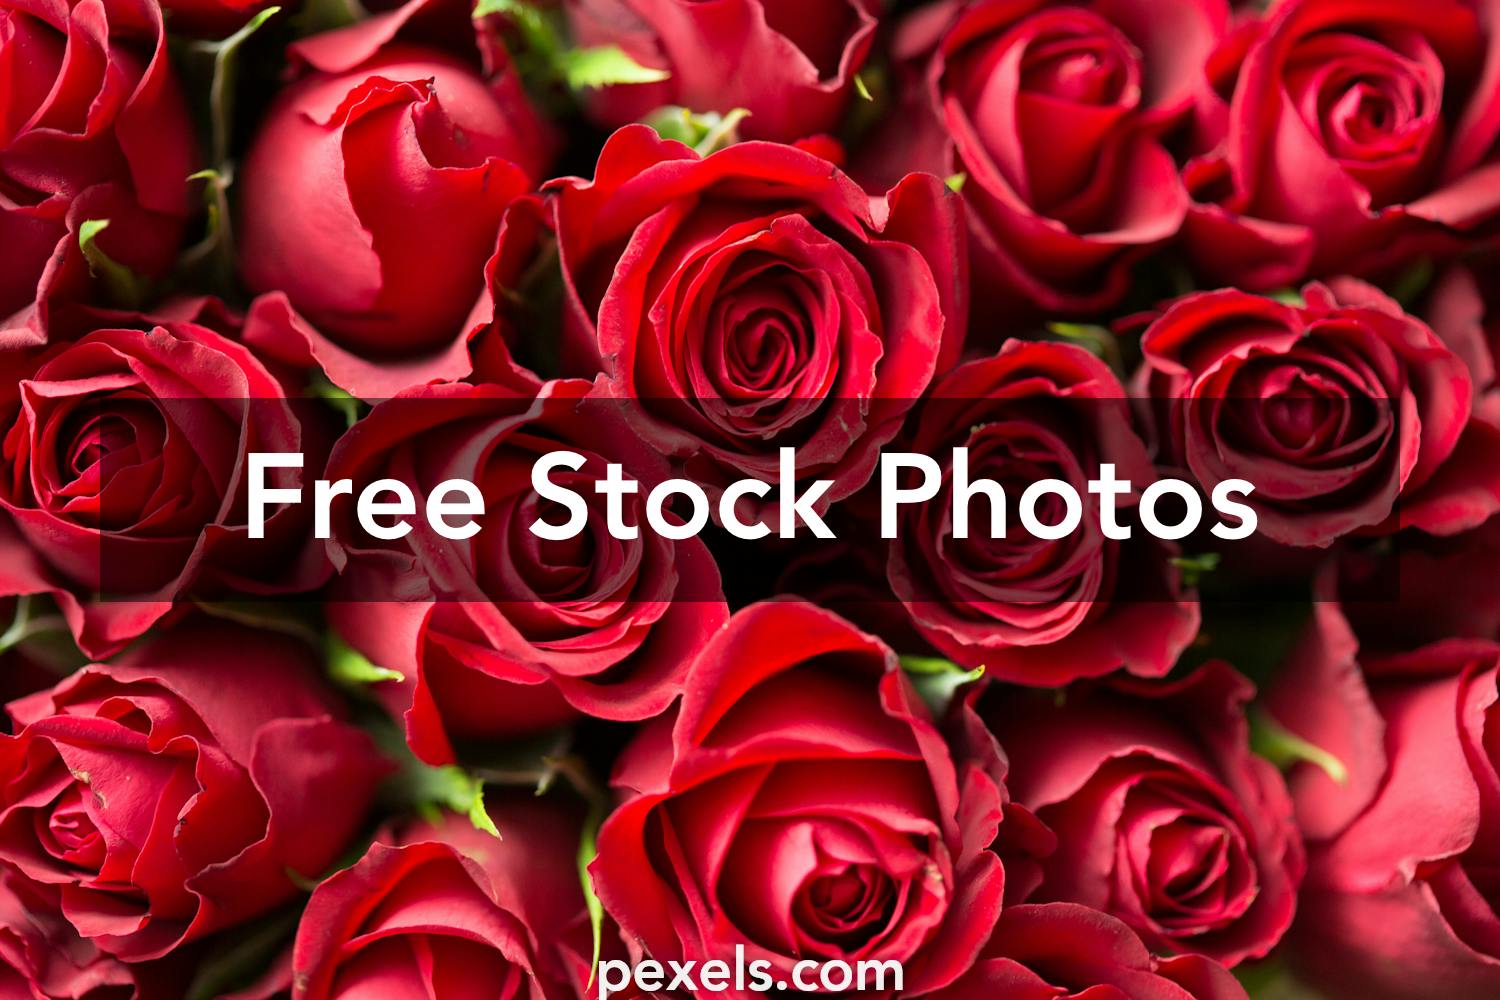 Rose Day Photos, Download The BEST Free Rose Day Stock Photos & HD Images